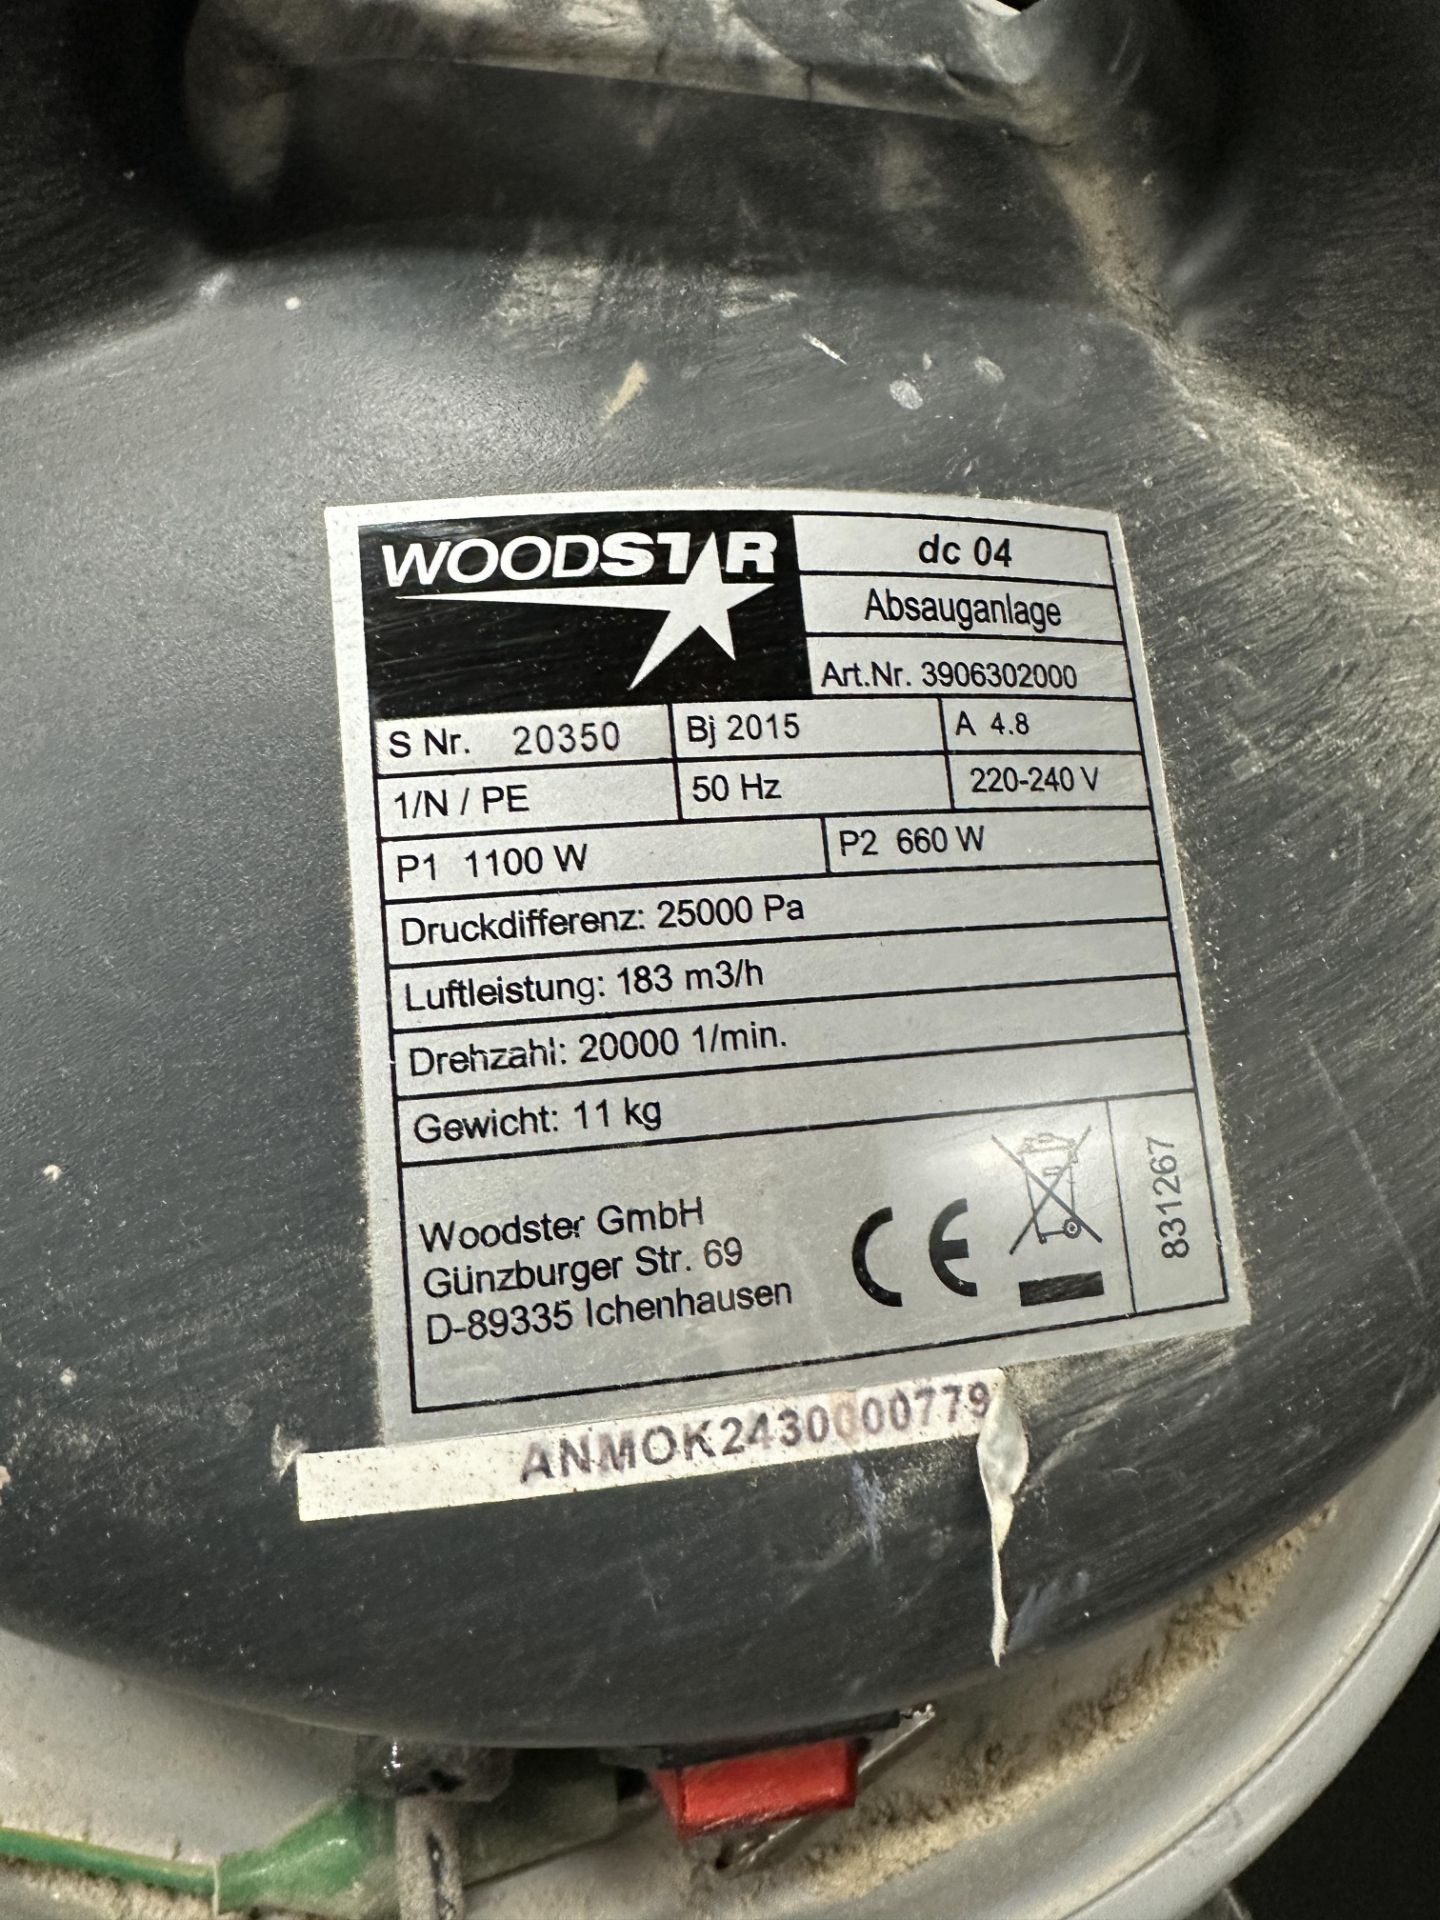 Woodstar DC 04 100mm dust extractor - Image 2 of 3